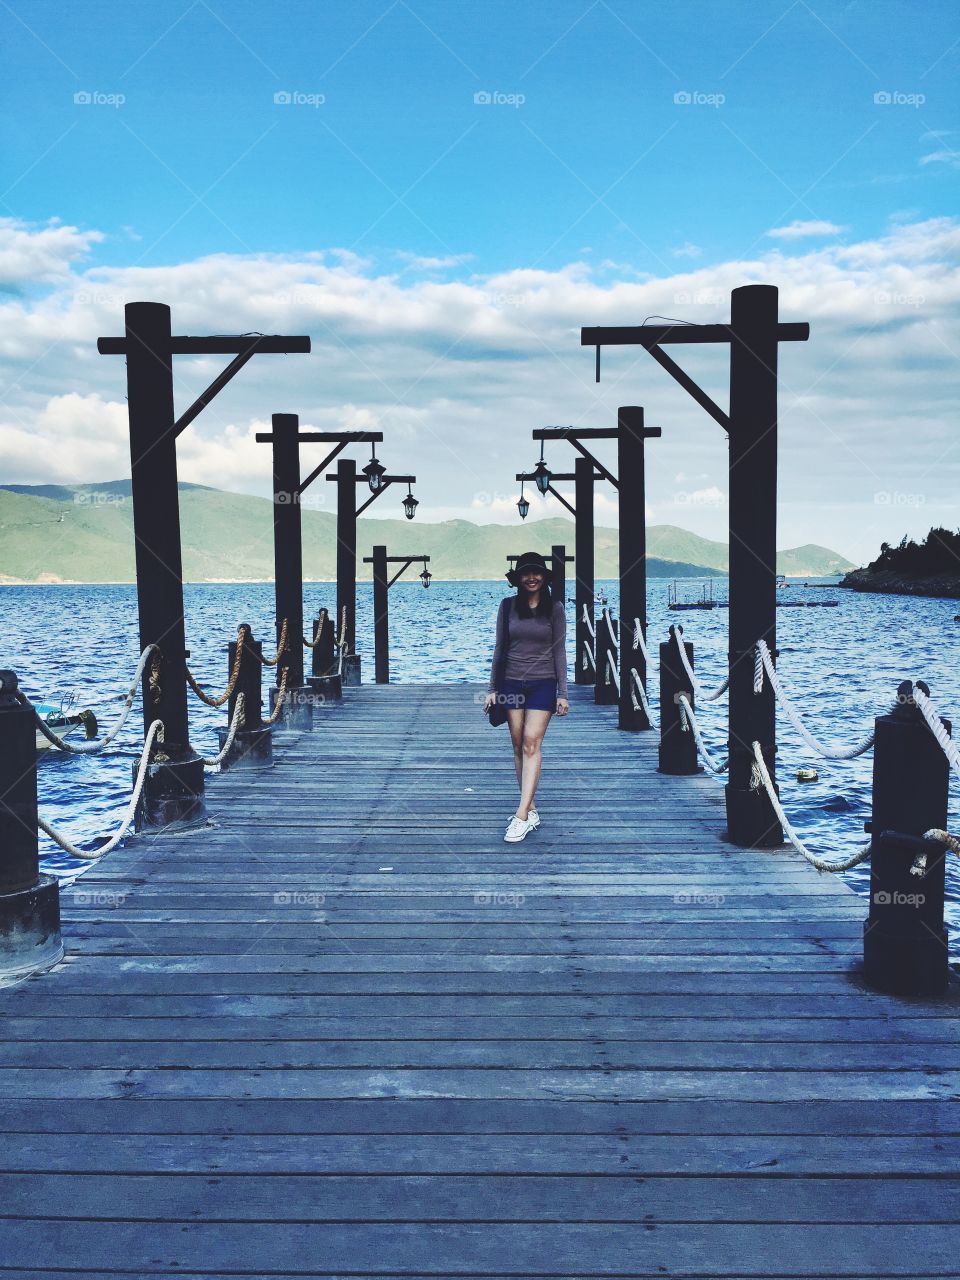 Fashionable woman standing on wooden pier over lake